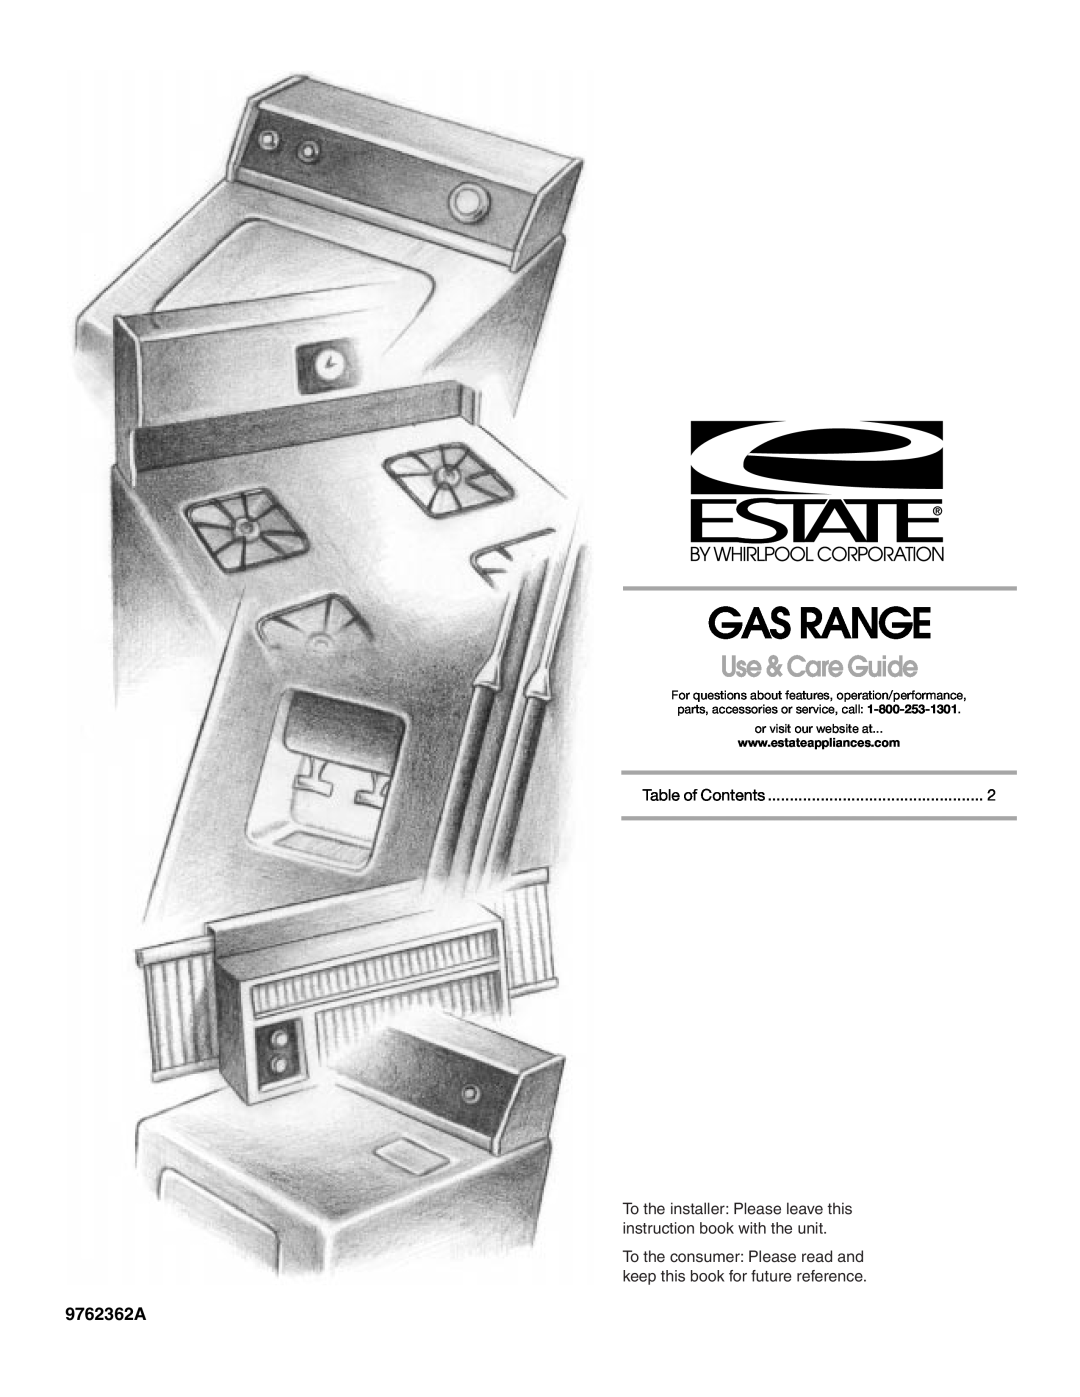 Whirlpool 9762362A manual Gas Range, Use & Care Guide, To the installer Please leave this instruction book with the unit 